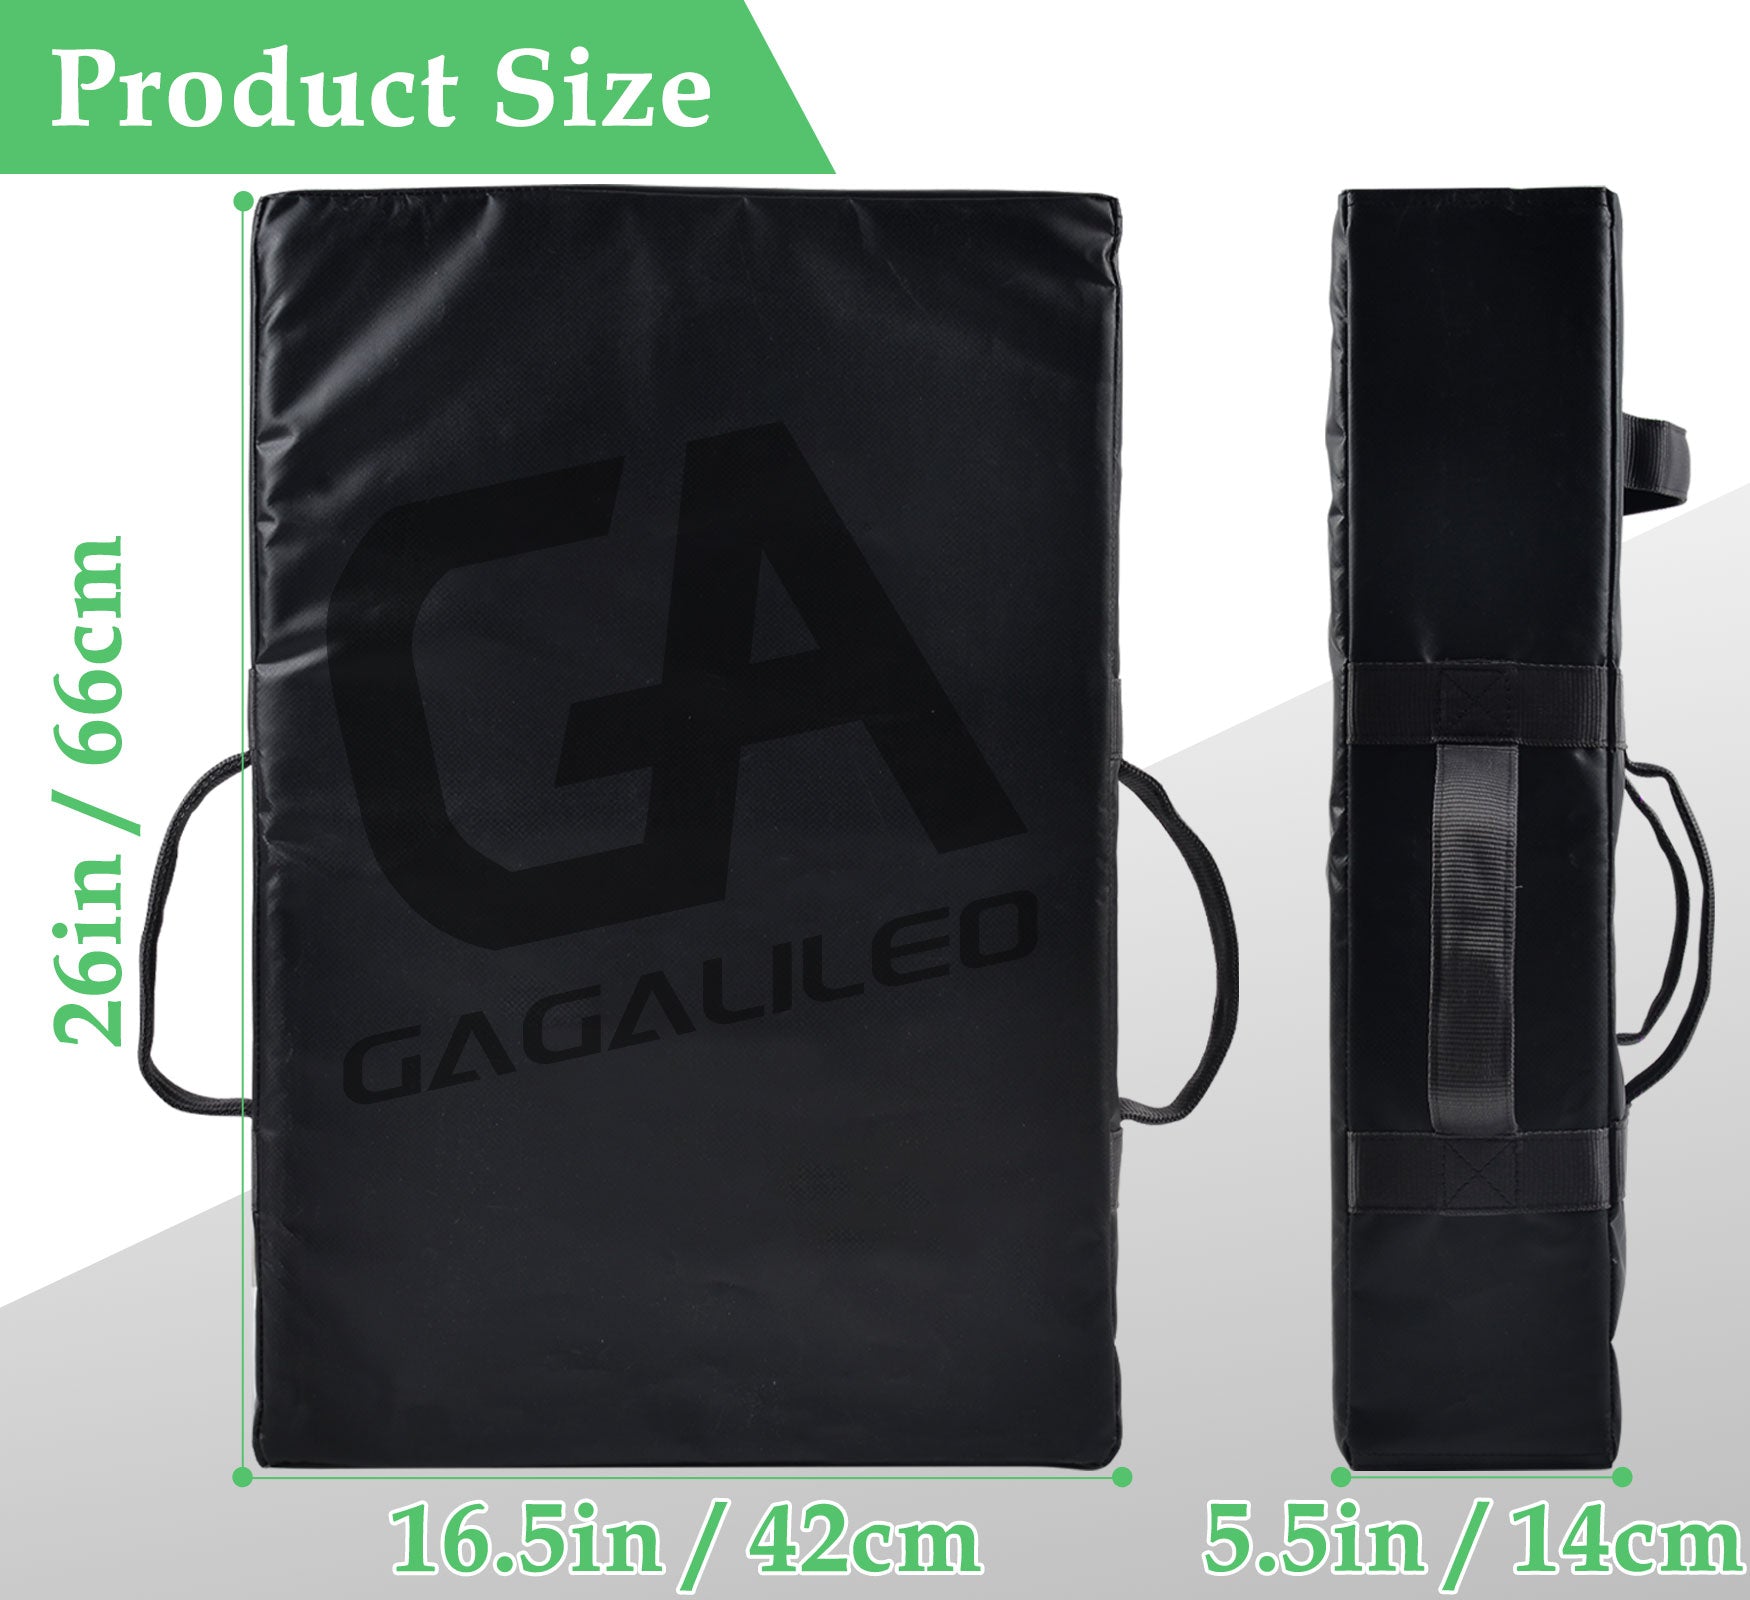 Gagalileo Bloking Pad,Maximize Your Training Multi-Sport Blocking Pad - Durable Synthetic Leather, High-Density Foam Core, Extra Large